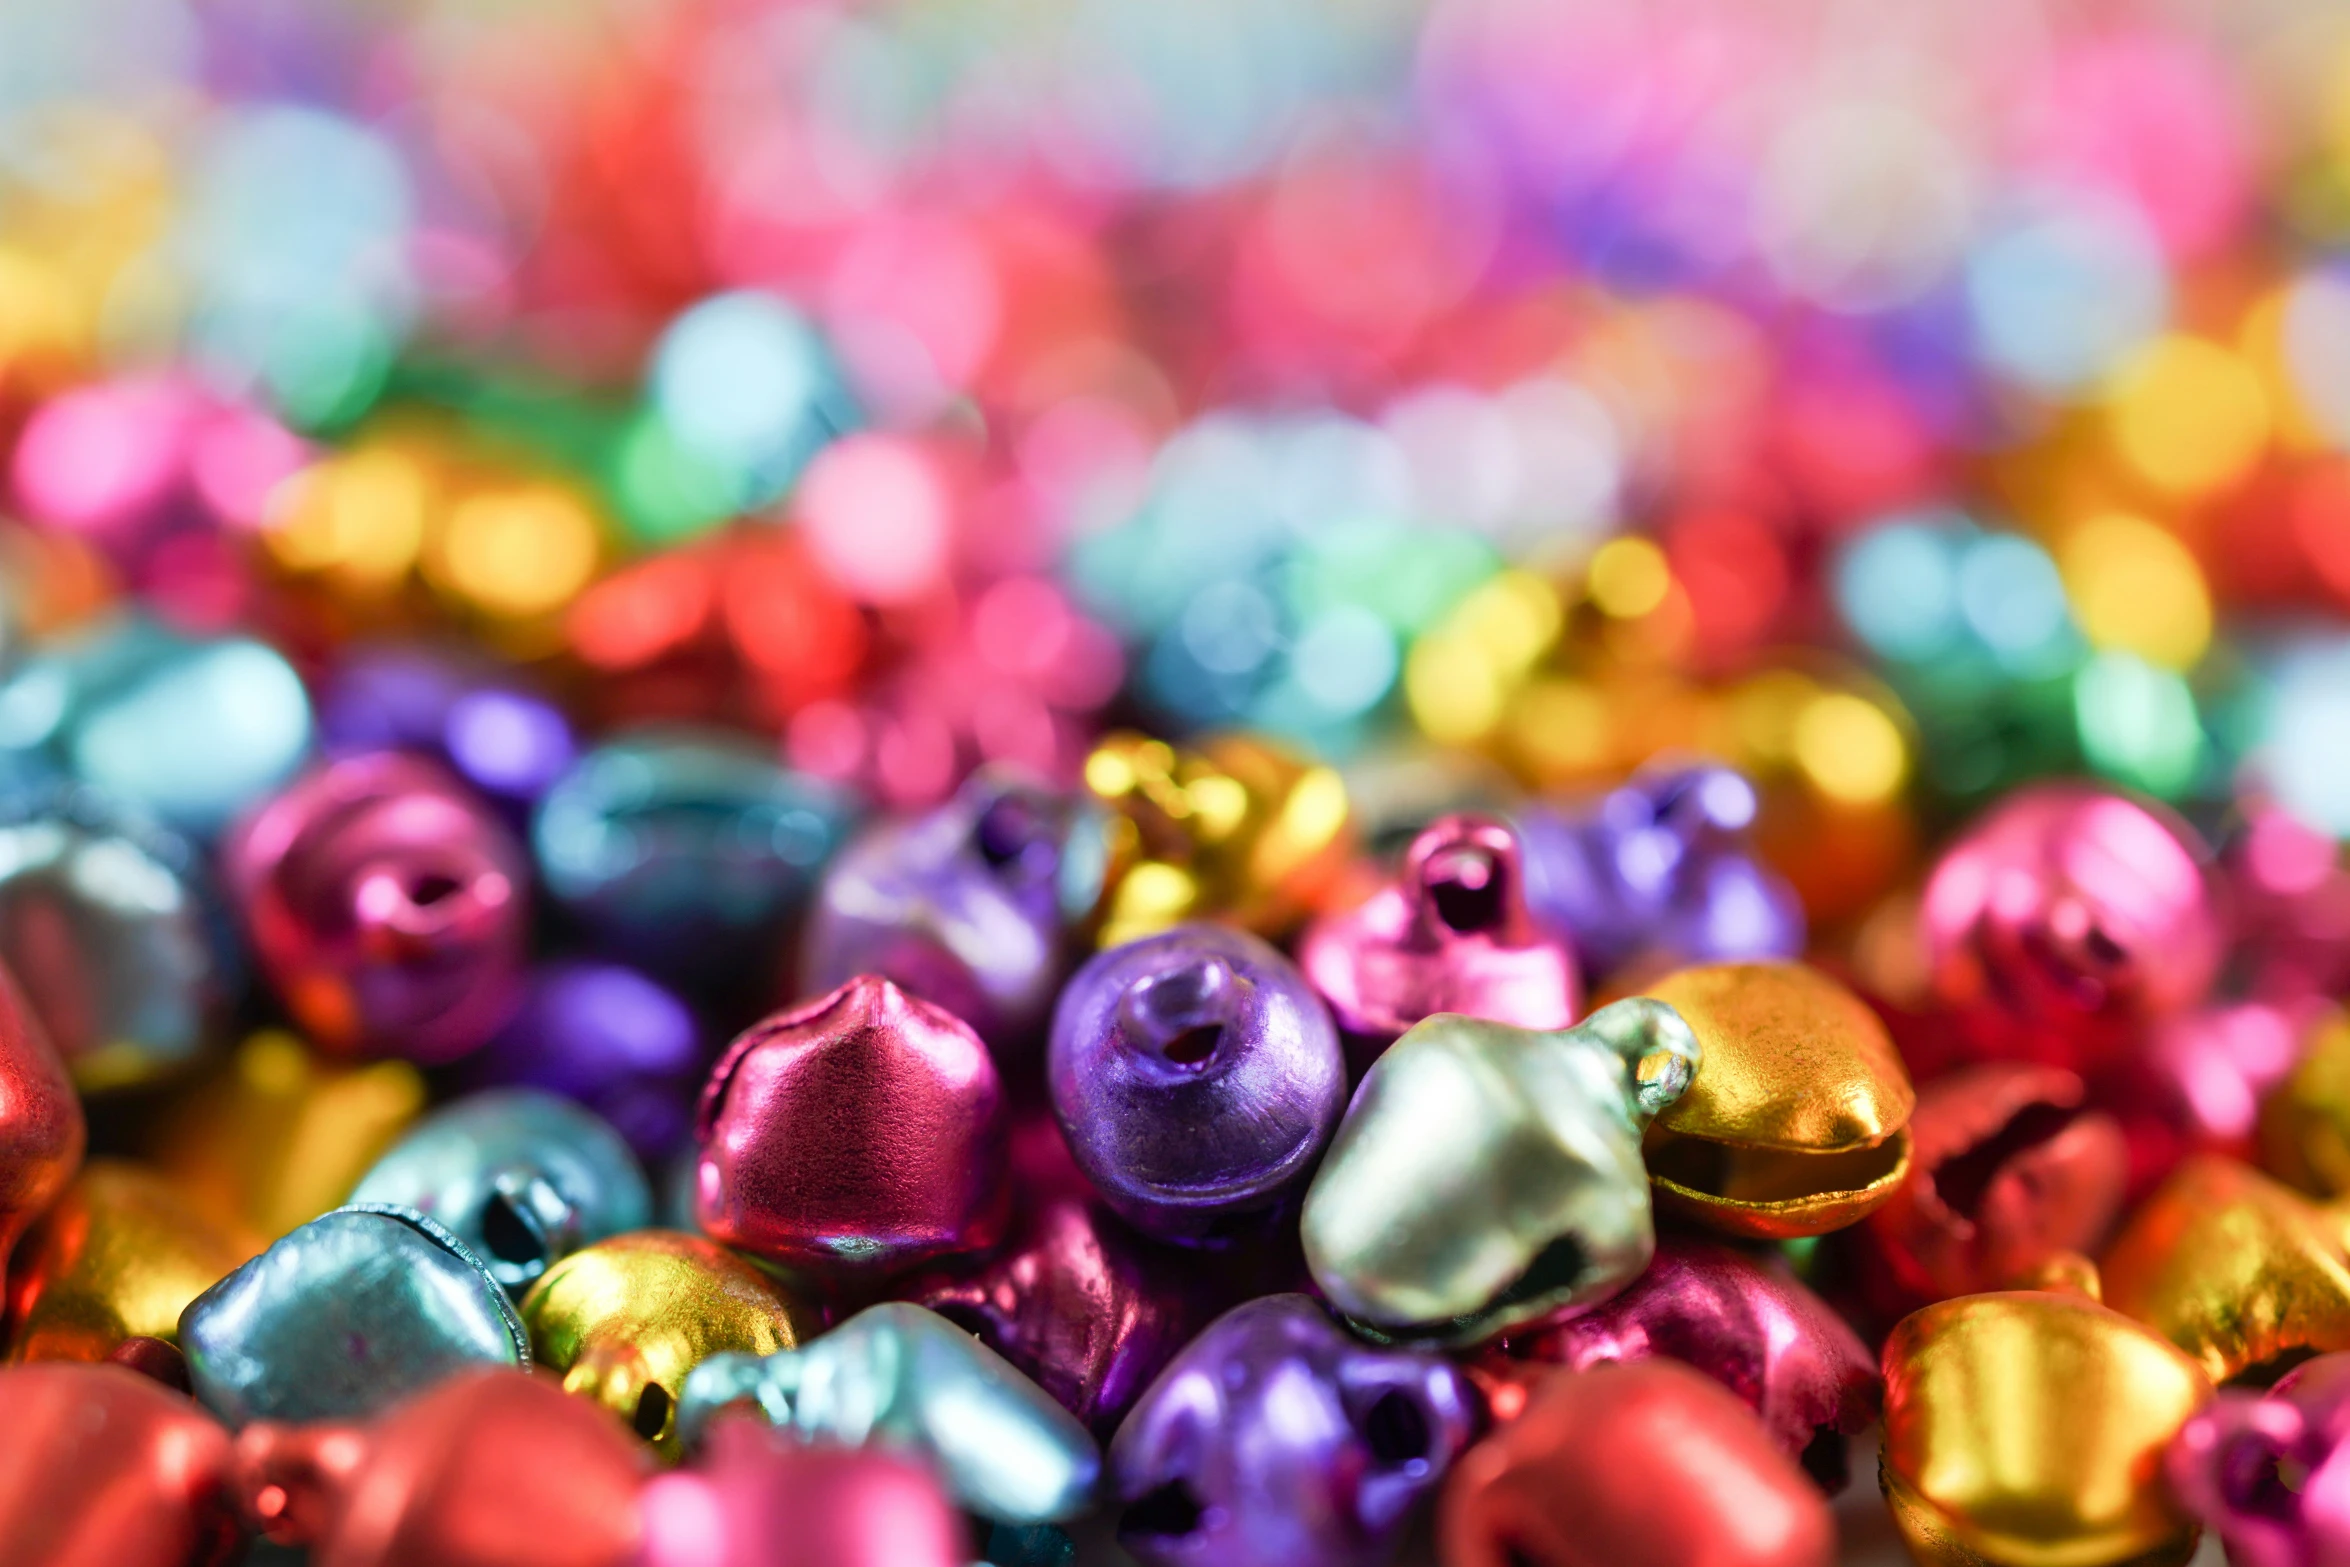 colorful metallic ornaments with gold bells in a pile